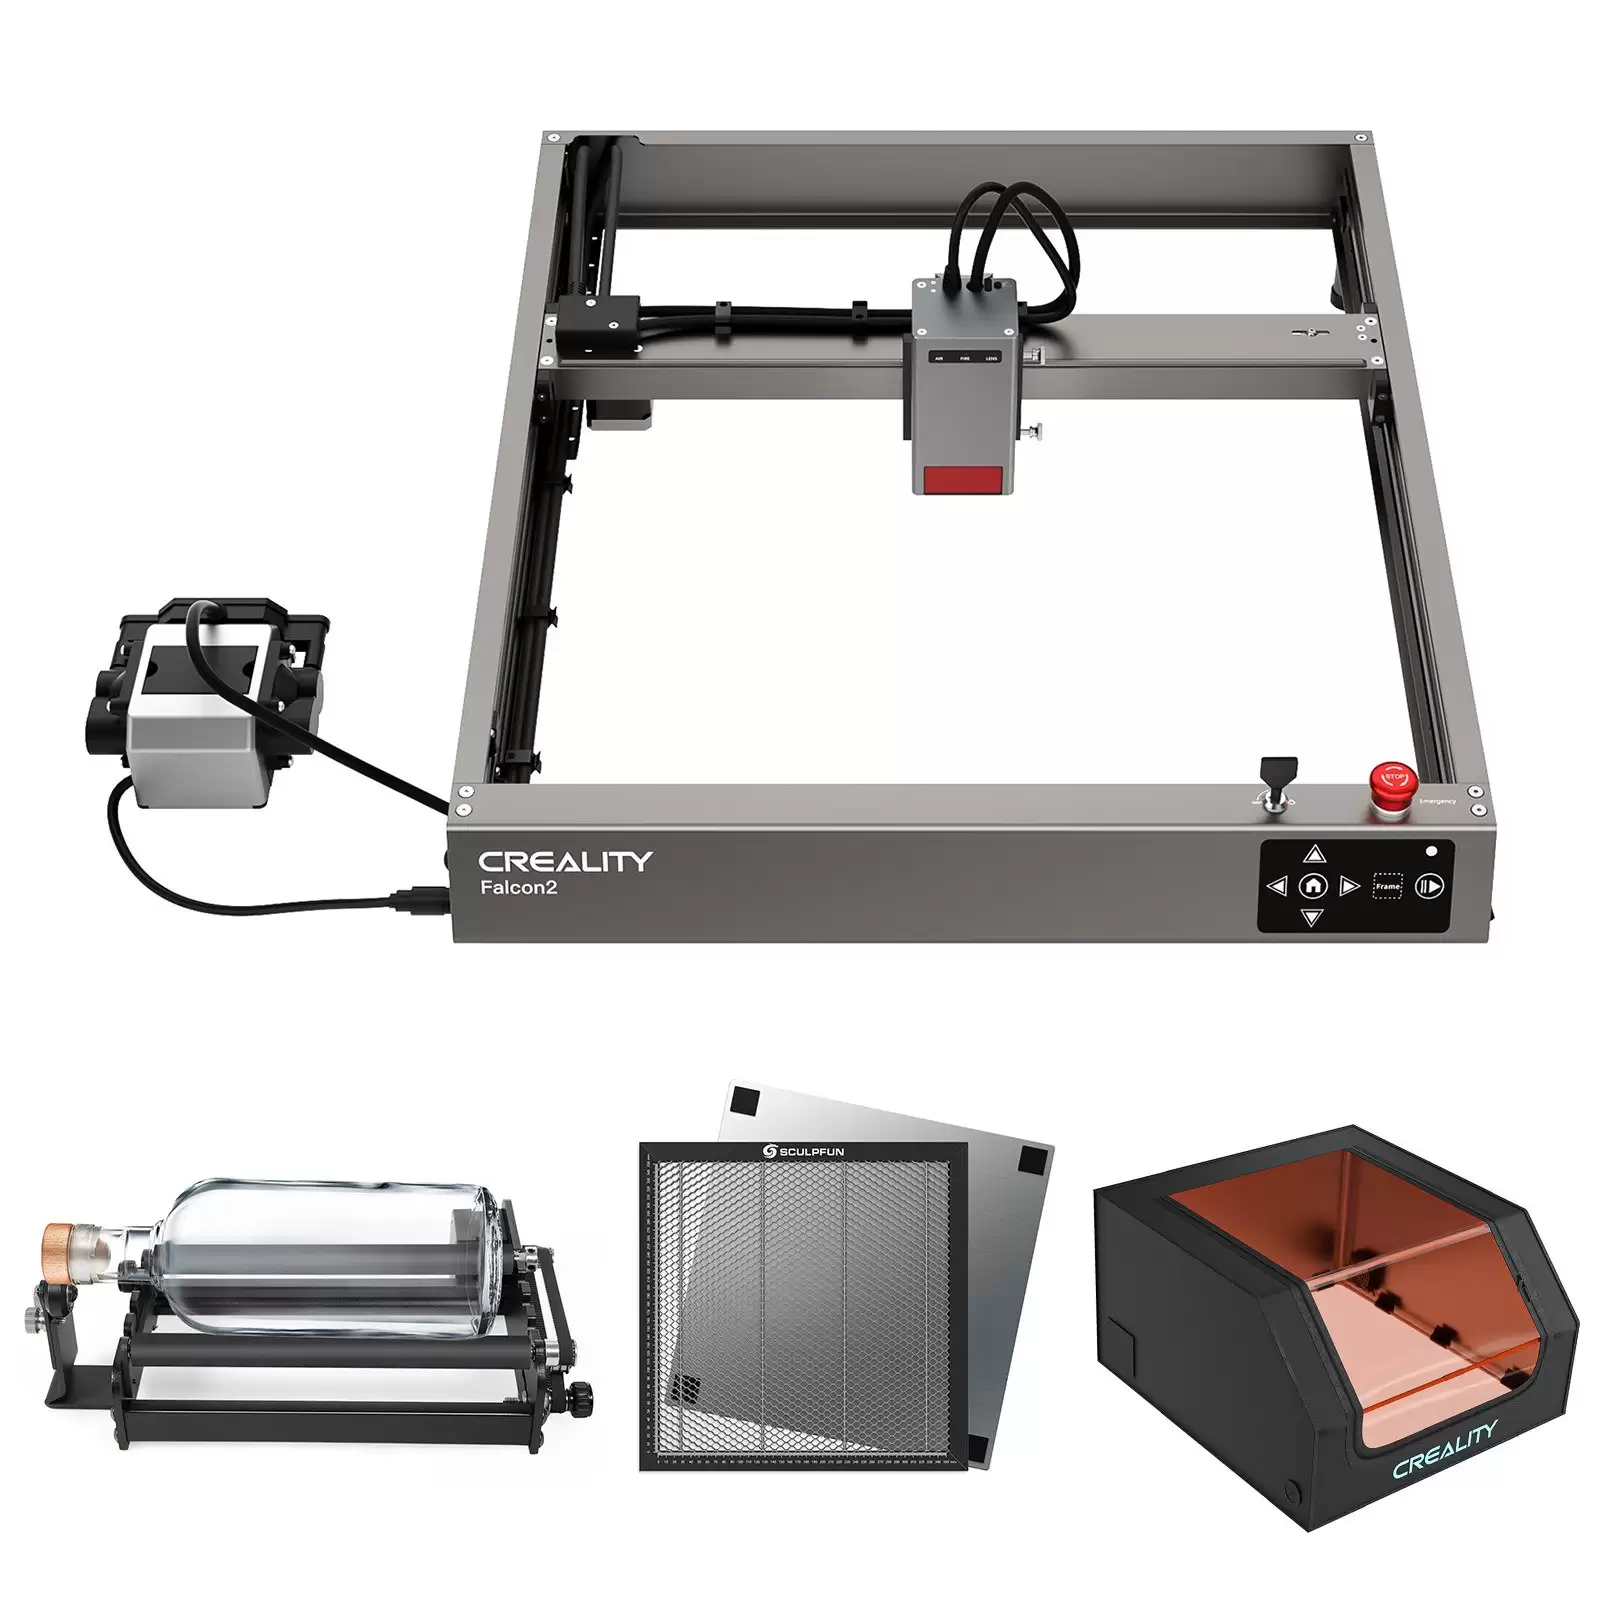 Order In Just $739 Creality Falcon2 22w Laser Engraver With Y-Axis Rotary Roller And 700x720x400mm Protective Box And 400x400mm Honeycomb Working Table Board Using This Tomtop Discount Code